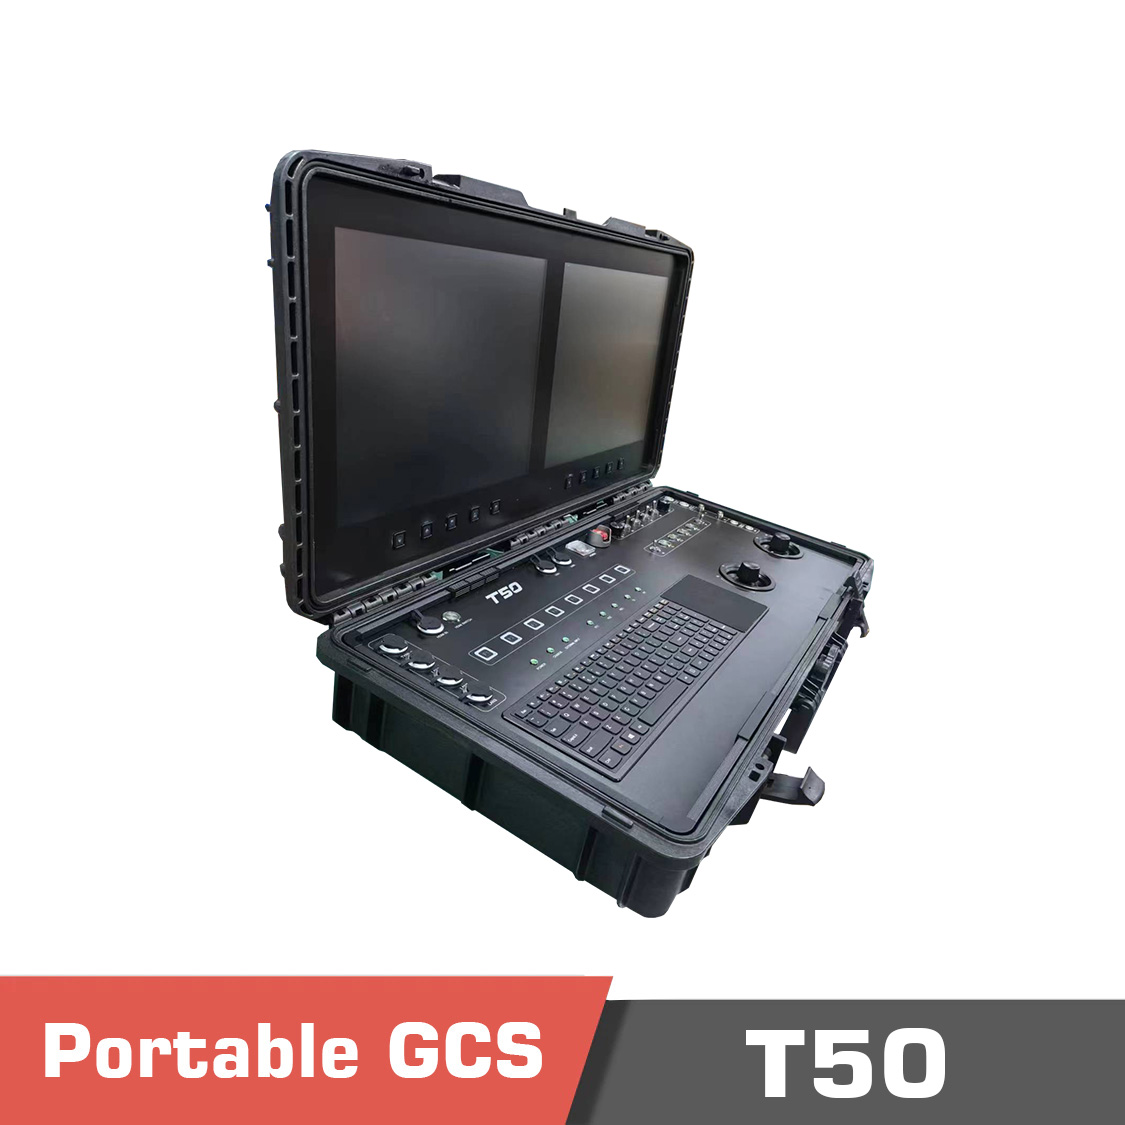 T50 temp. 1 - mn-gc50 gcs,handheld ground control station,ground control station,suitcase gcs,gcs,radio control,high brightness,high resolution,high brightness screen,1040nit brightness,1000nit brightness,video transmission,control system,data transmission,rc access,ideal for harsh environment,long-range,transparent transmission,lan port,multiple programming mode,remote control,various external input,dual screen,dual screen gcs - motionew - 2